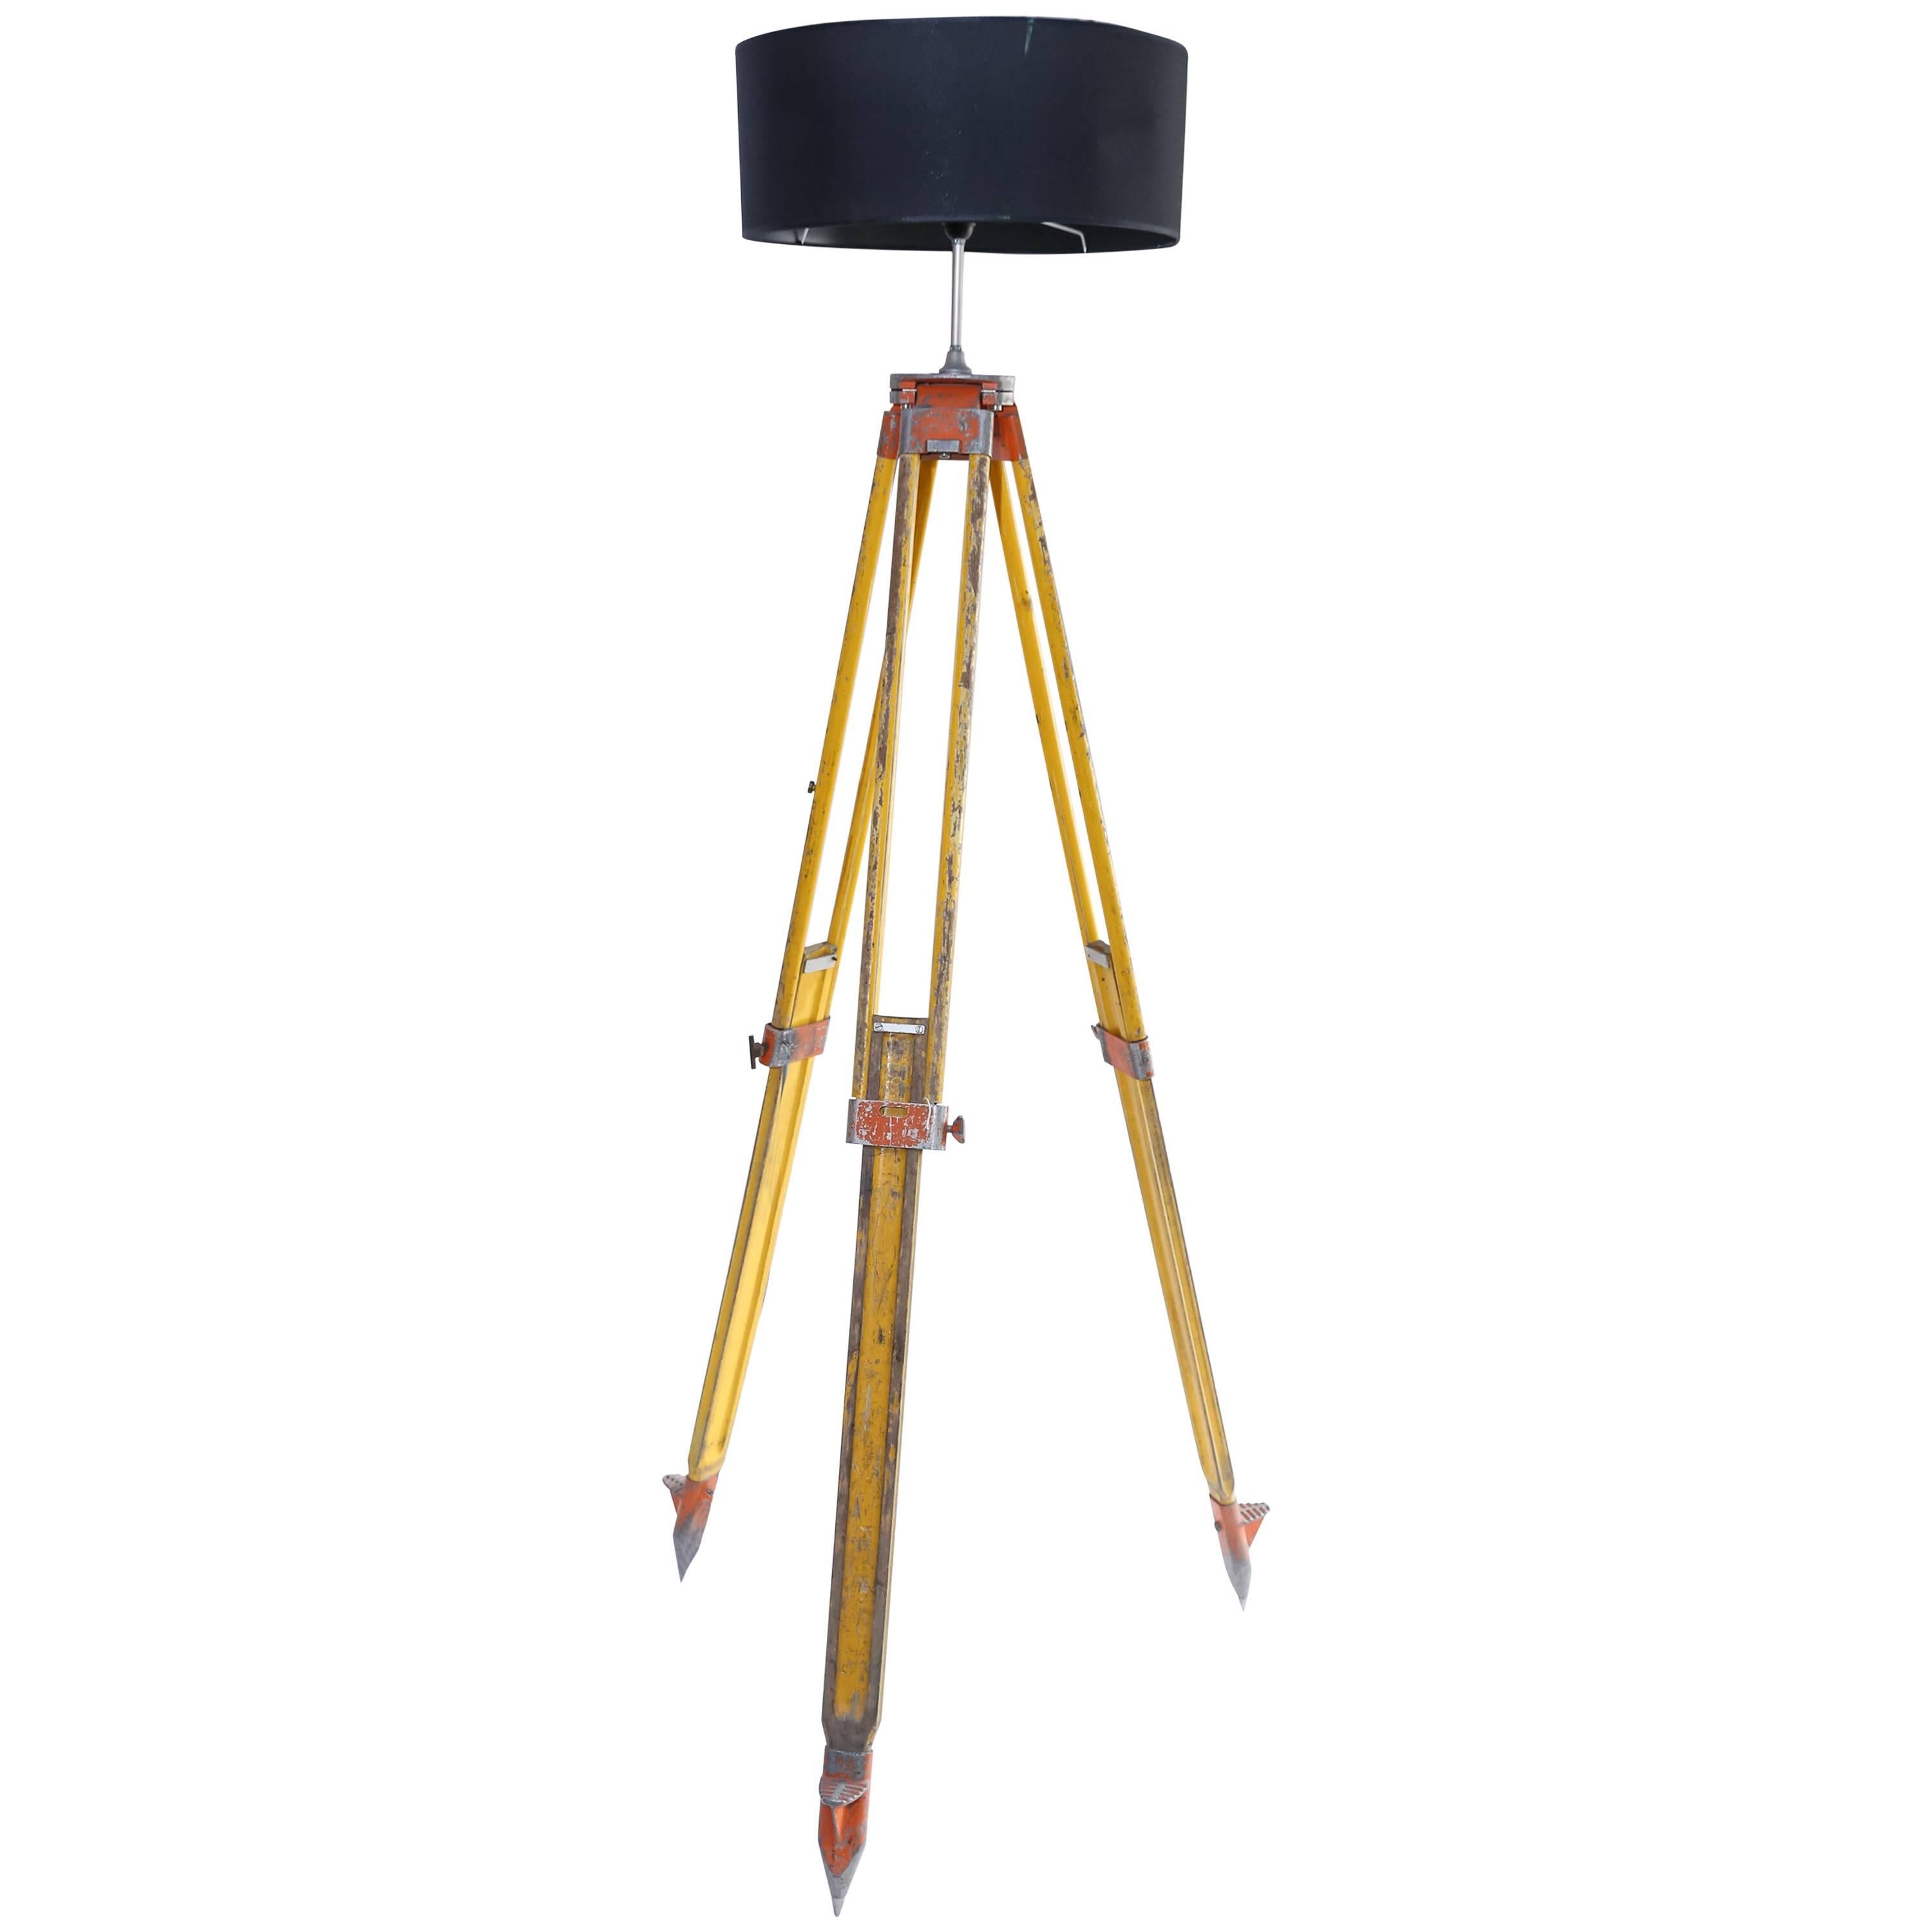 Floor or Table Lamp Made from Vintage Industrial Surveyor's Tripod